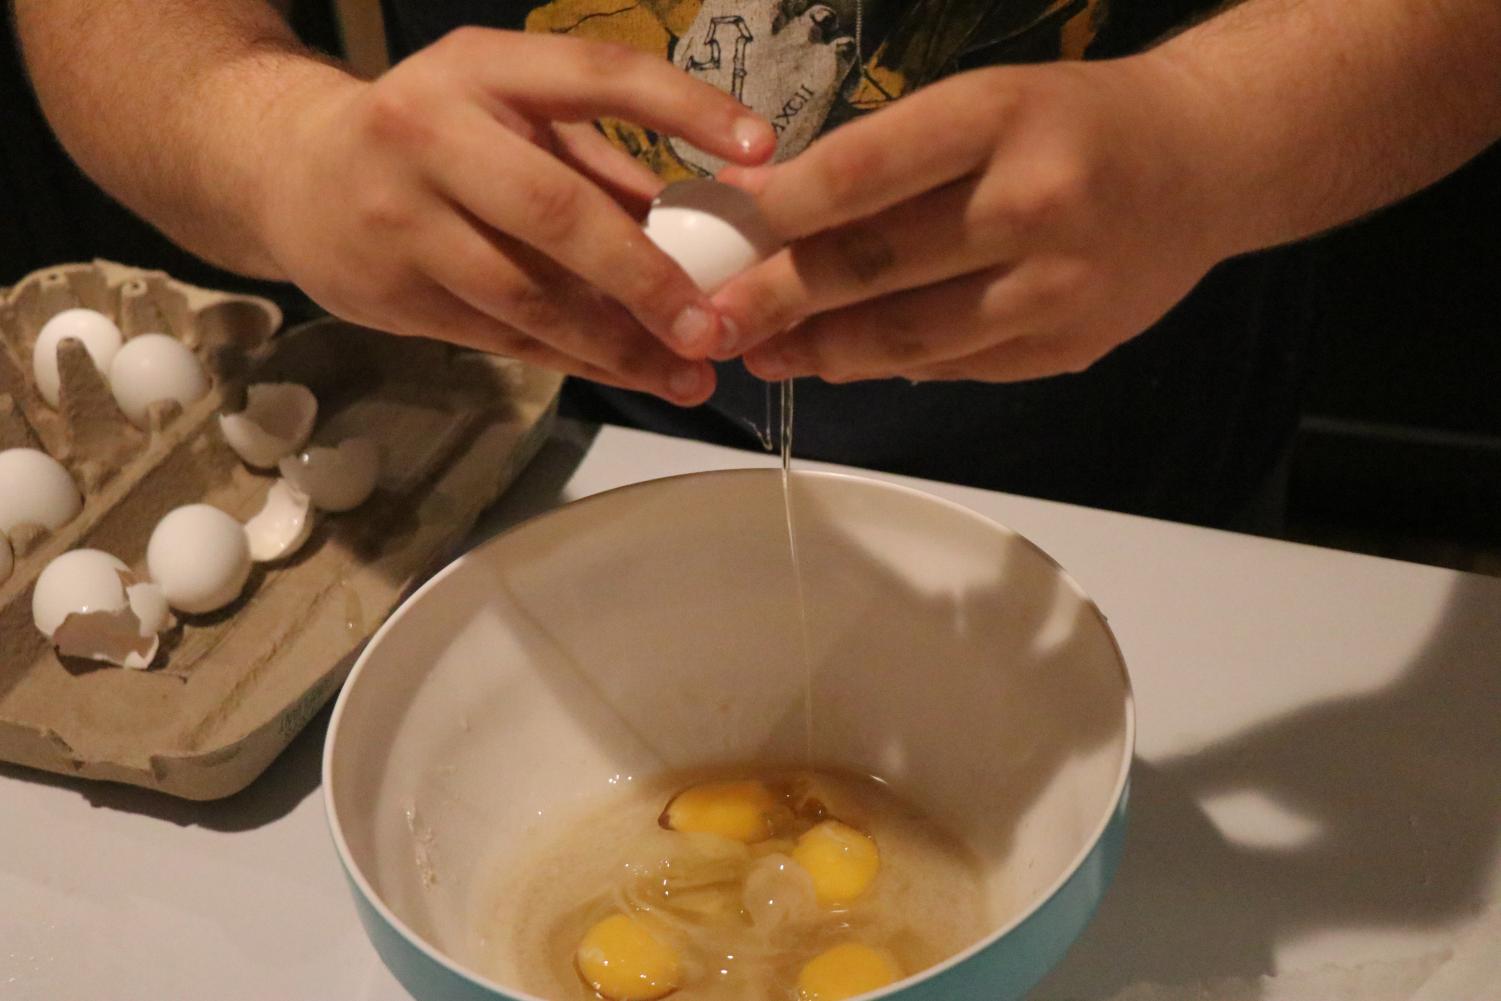 eggs being cracked into bowl with bread ingredients